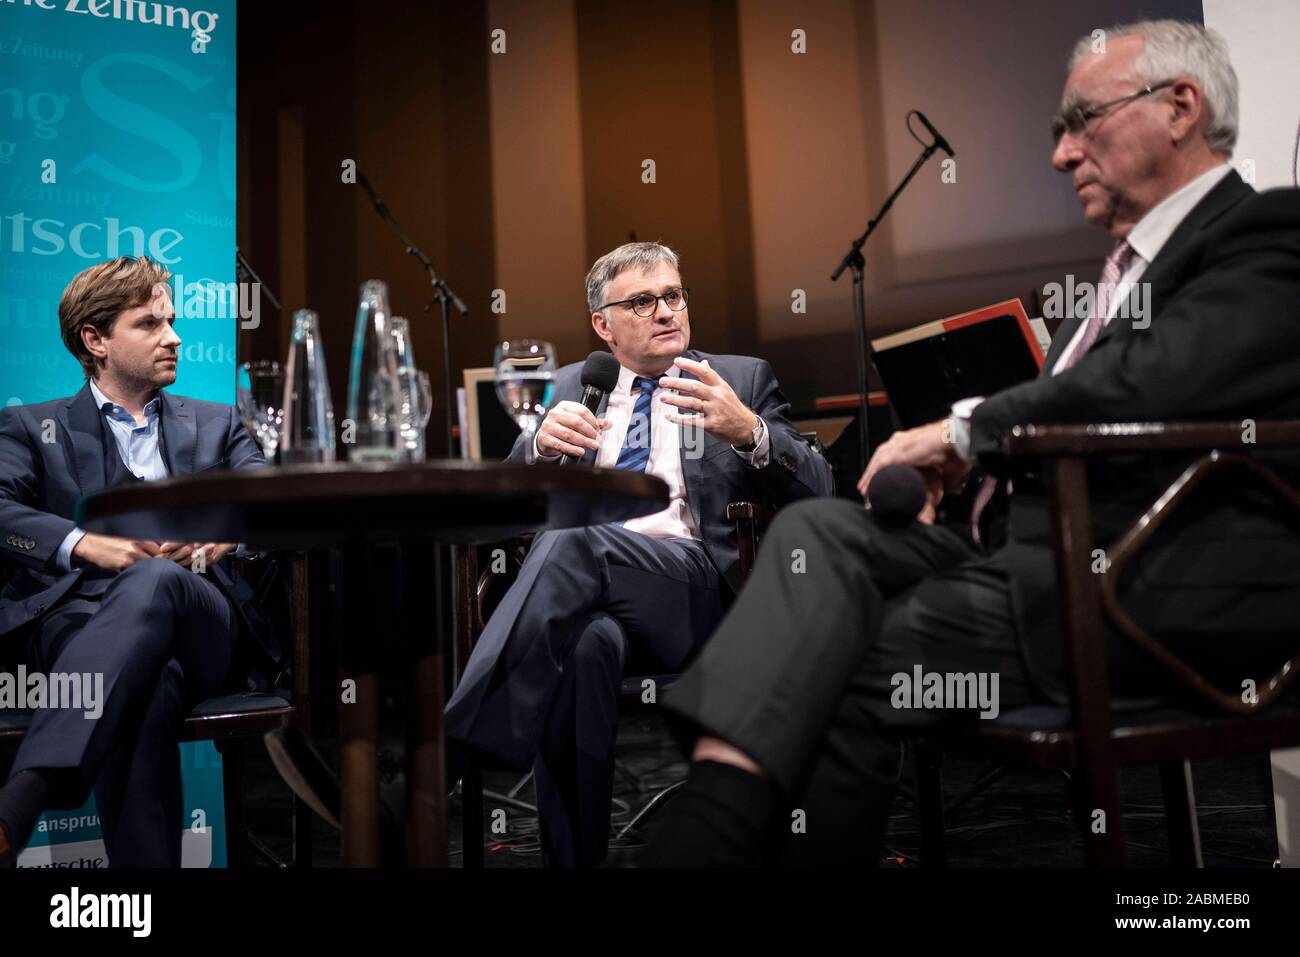 At the beginning of the series 'Wärme und Wallung' of the 'Süddeutsche Zeitung' and the Münchner Kammerorchester Clemens Schuldt, director of the MKO, SZ journalist Stefan Kornelius and Theo Waigel (CSU) discuss Germany 30 years after reunification in the Munich Prinzregententheater. [automated translation] Stock Photo